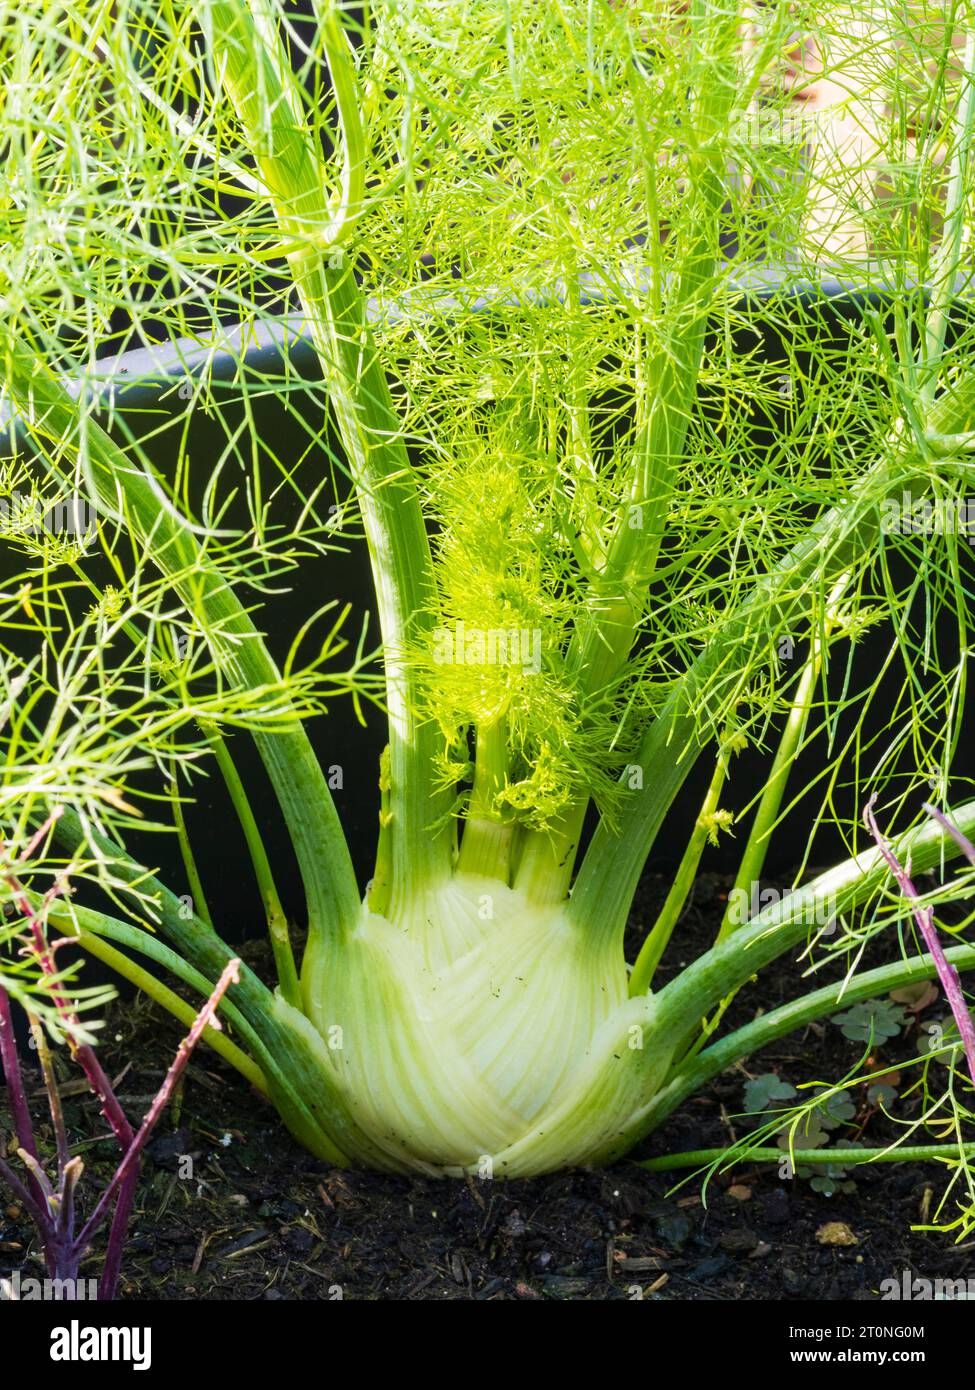 Container grown bulb of the aniseed flavoured hardy florence fennel, Foeniculum vulgare var azoricum Stock Photo